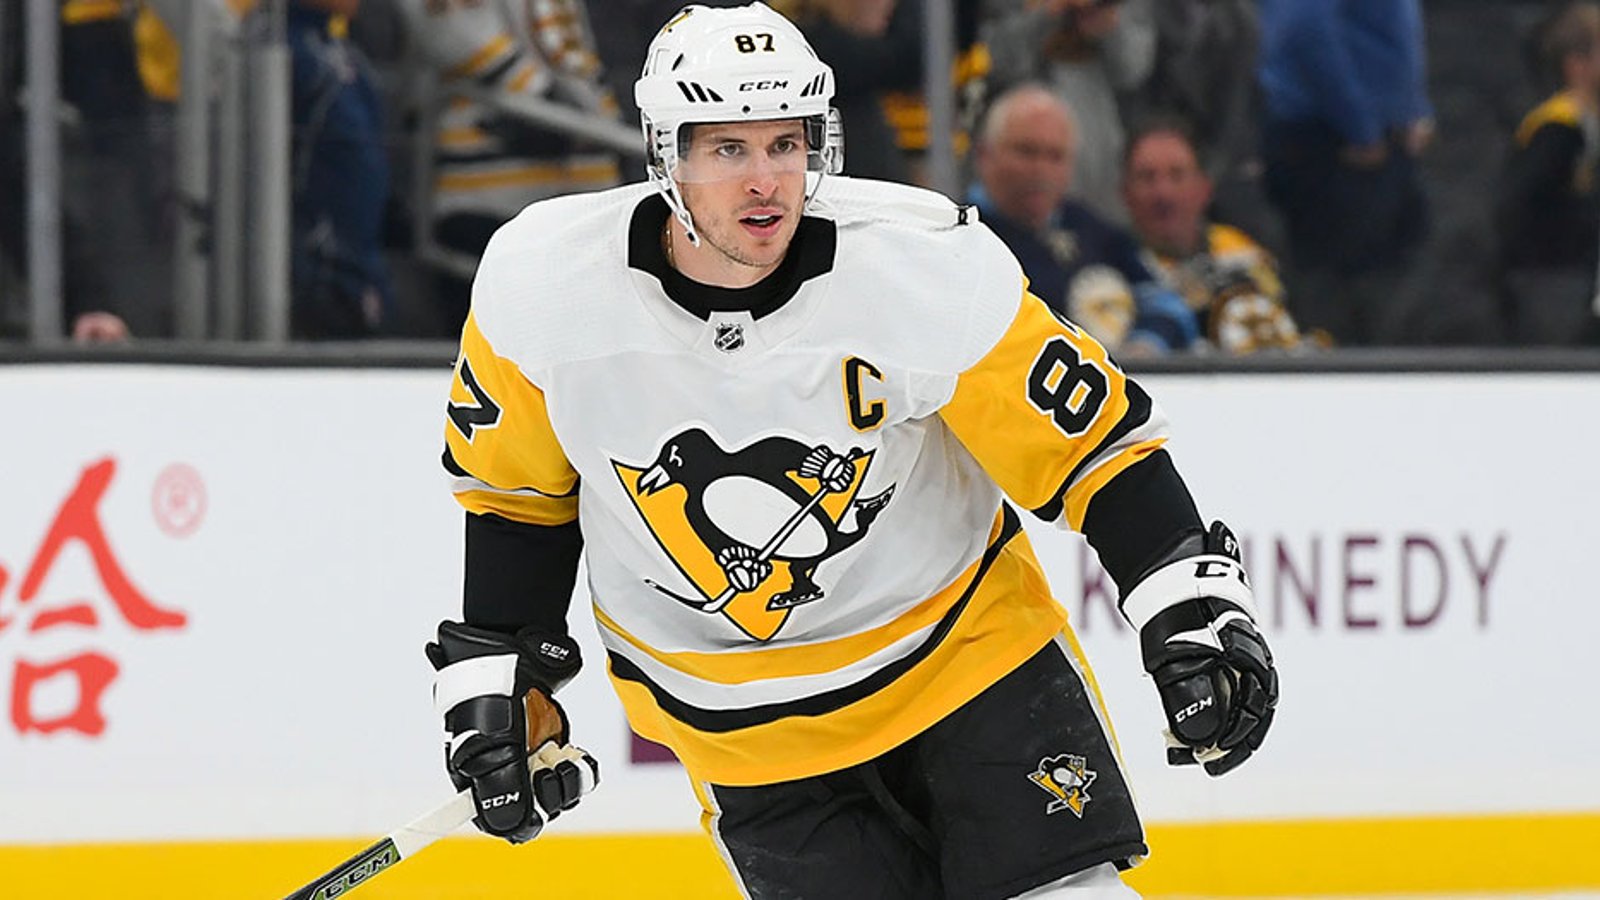 Crosby returns to Penguins lineup